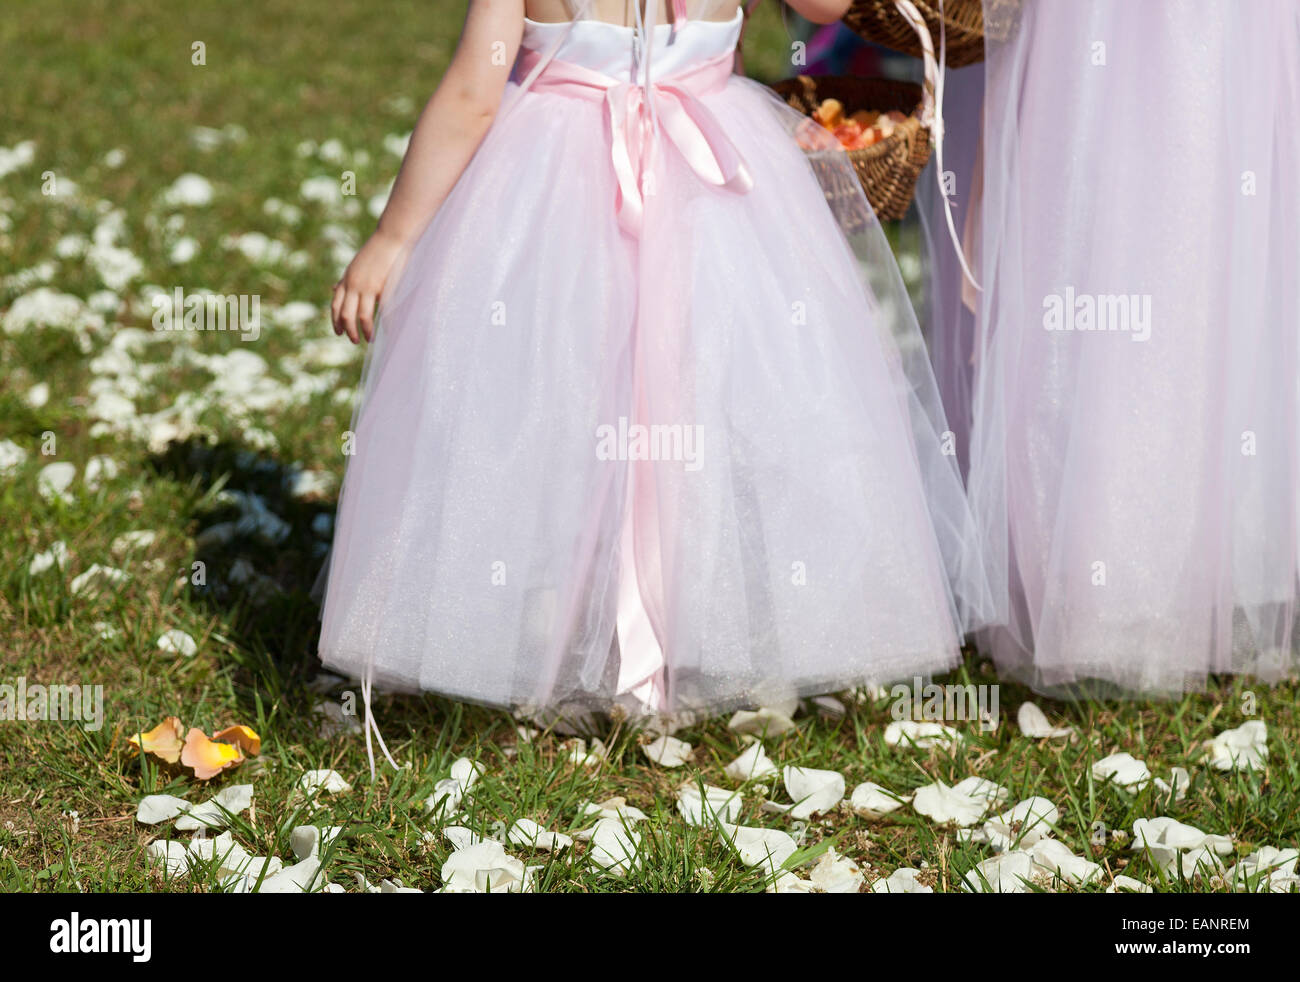 Young girl in pink chiffon bride's maid gown carrying flower basket stands on lawn covered with rose pedals Stock Photo